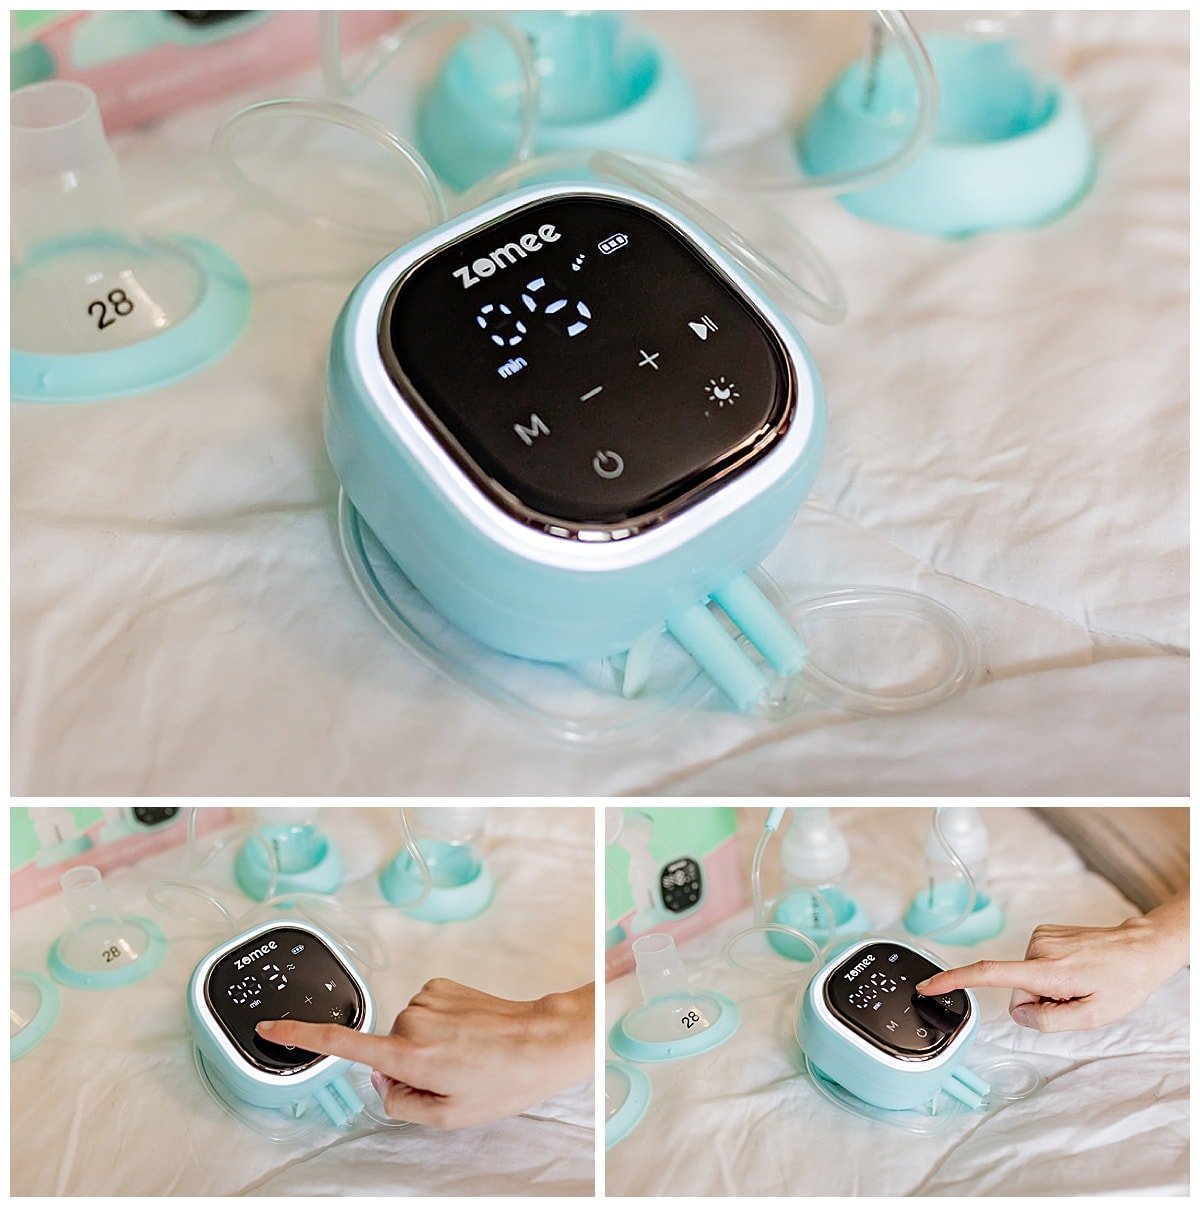 Zomee Z2 Double Electric Breast Pump: Closer Look and Review